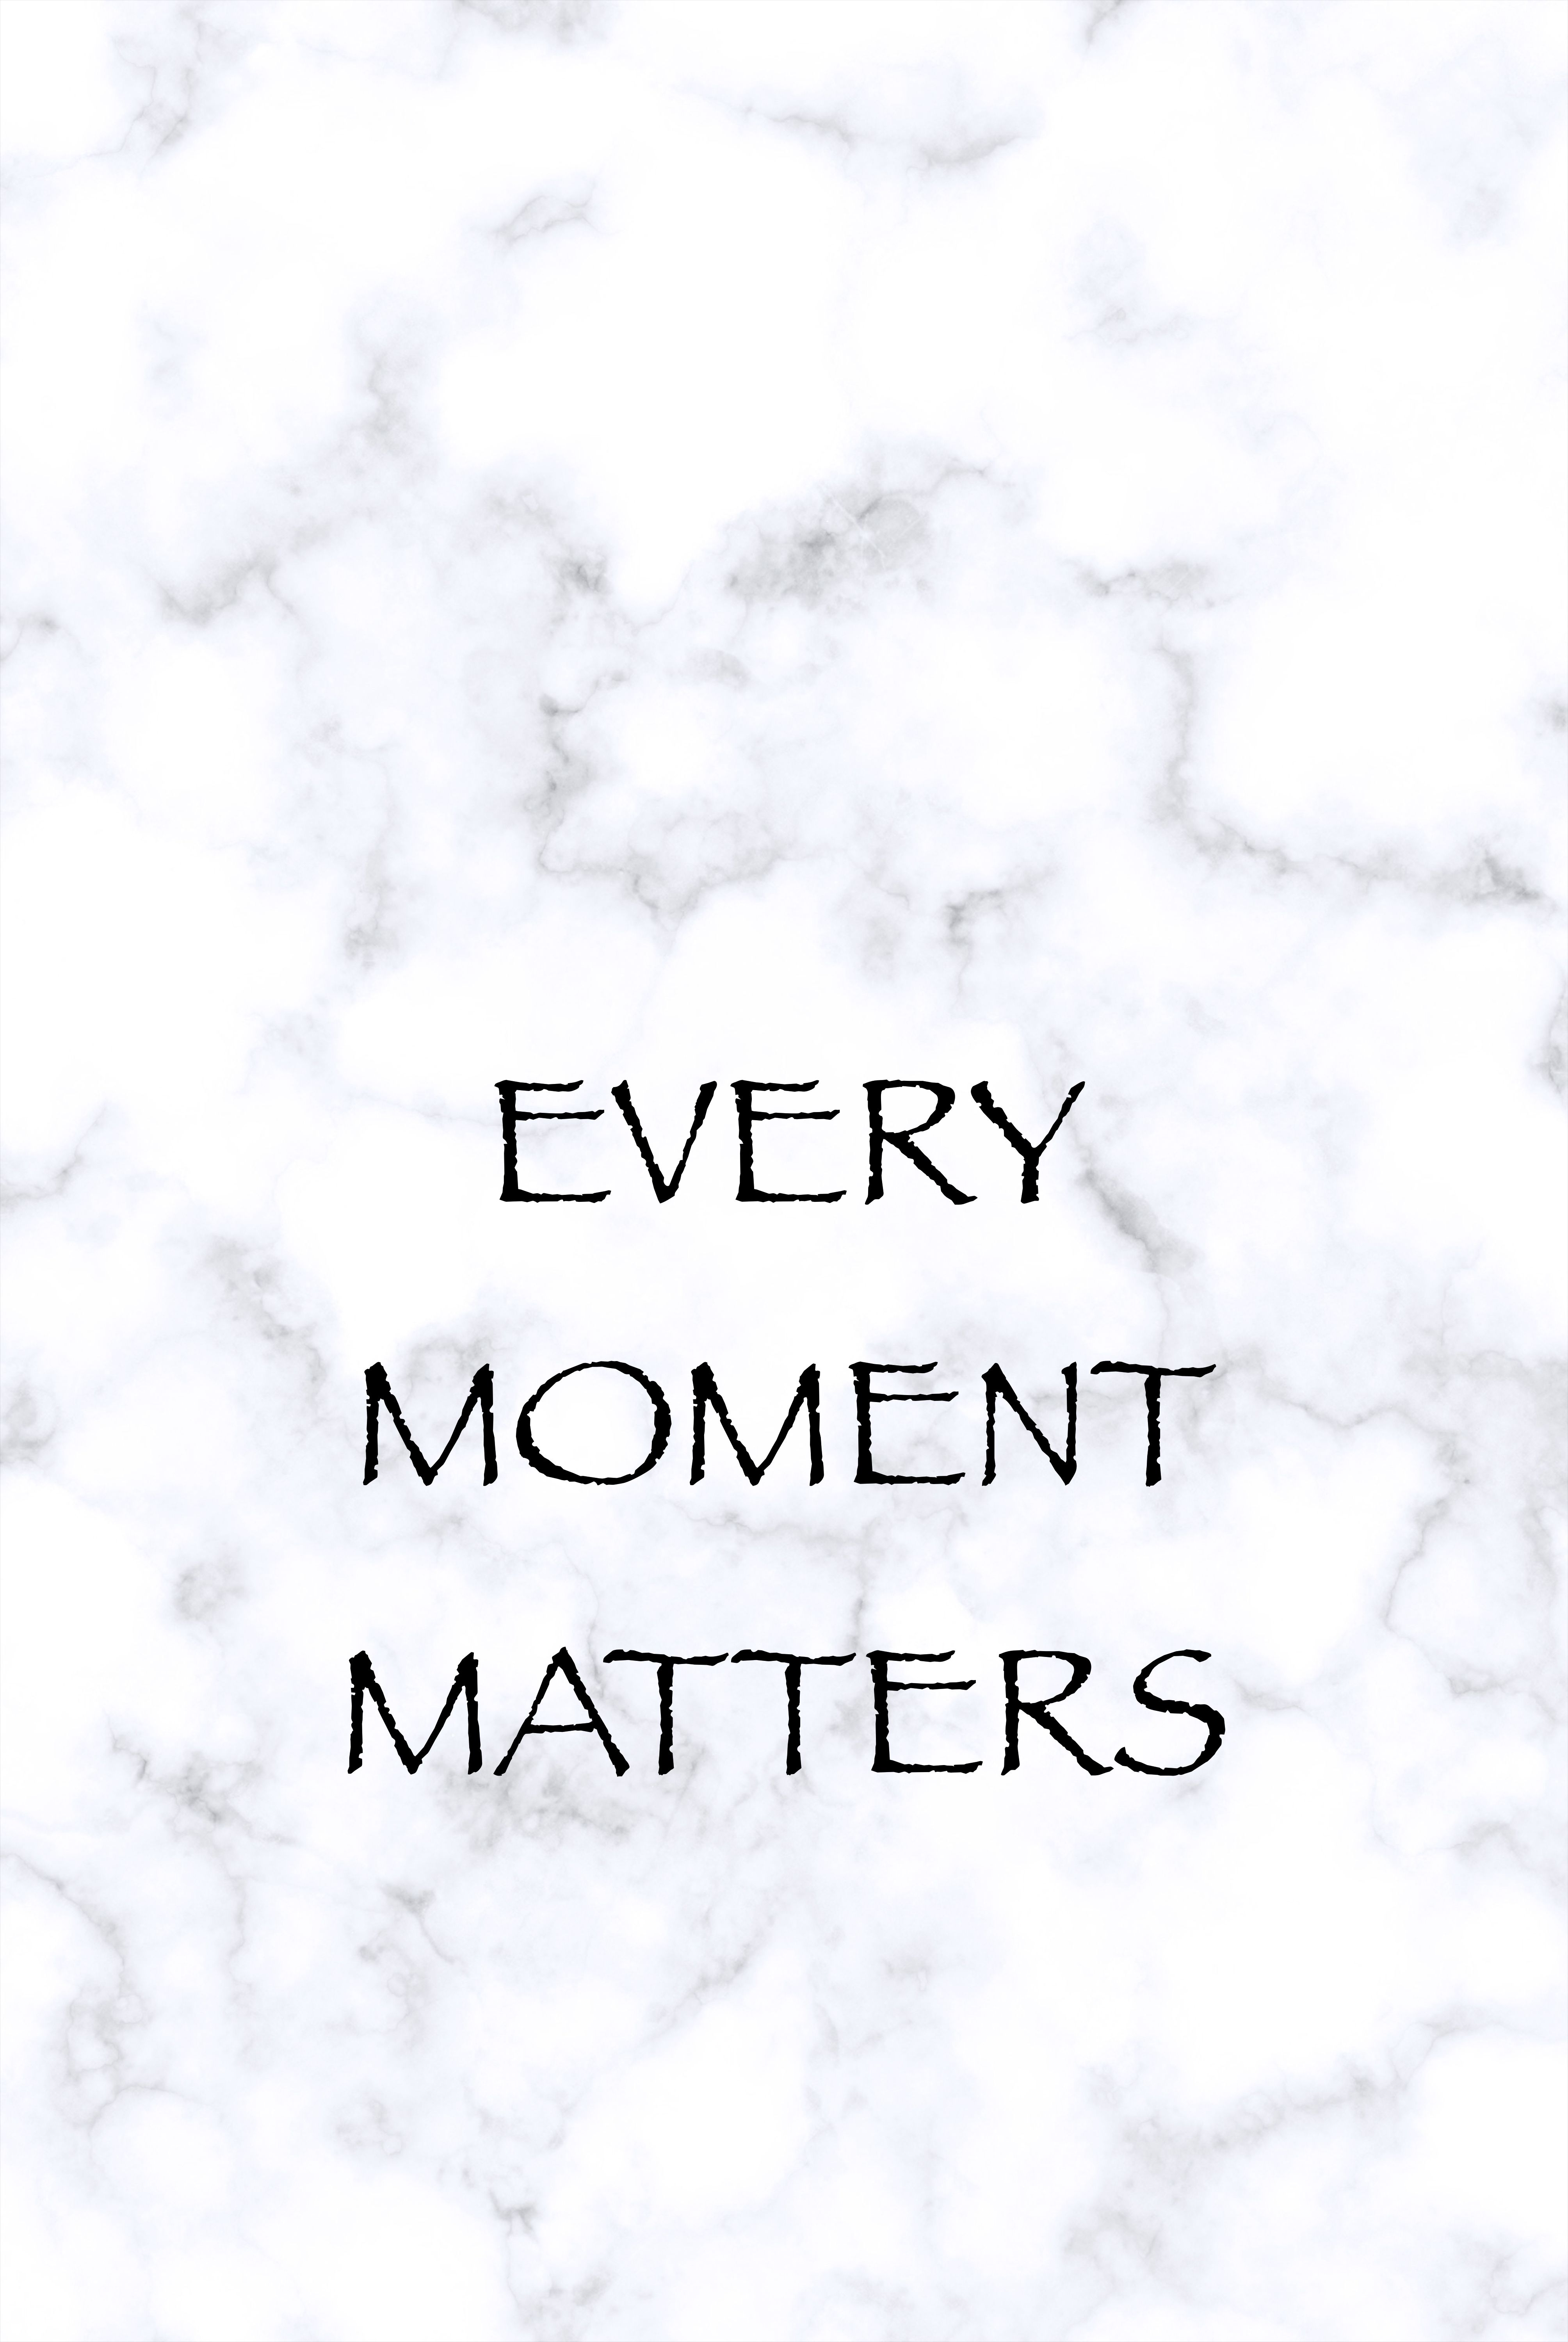 inspiration, motivation, words, inscription, moment, just a moment cell phone wallpapers